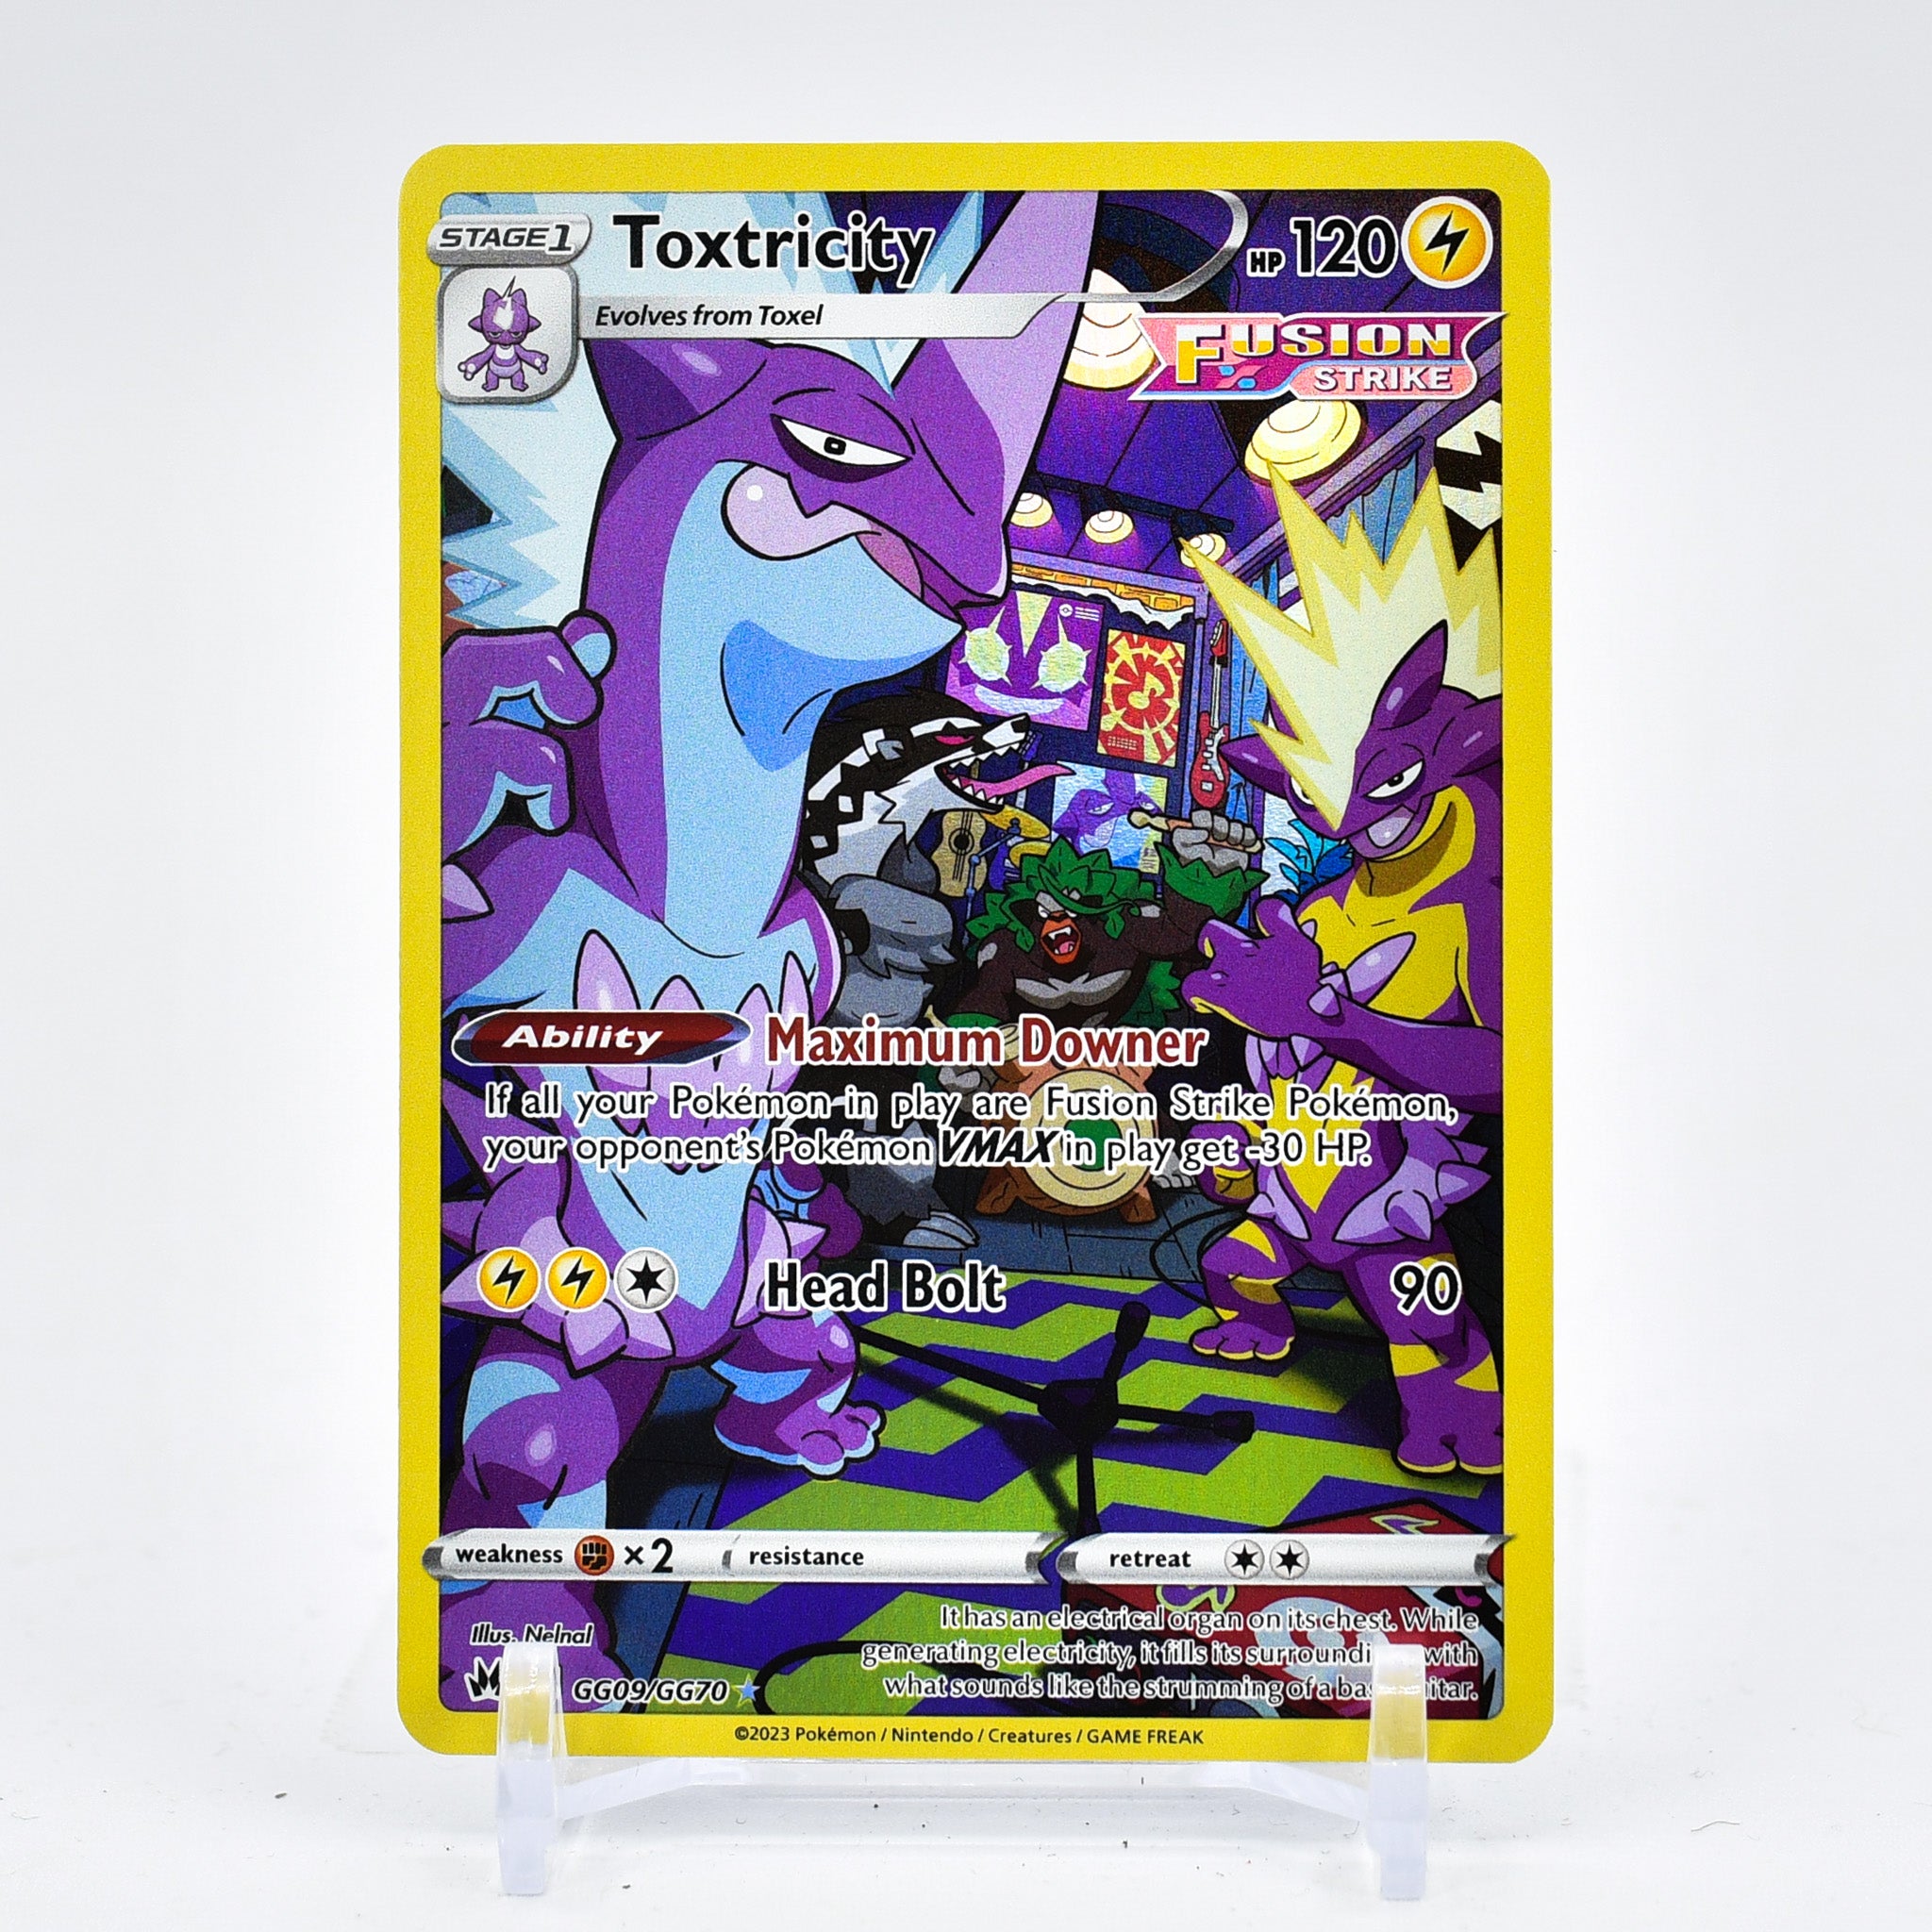 Toxtricity - GG09/GG70 Crown Zenith GALARIAN GALLERY Pokemon - NM/MINT